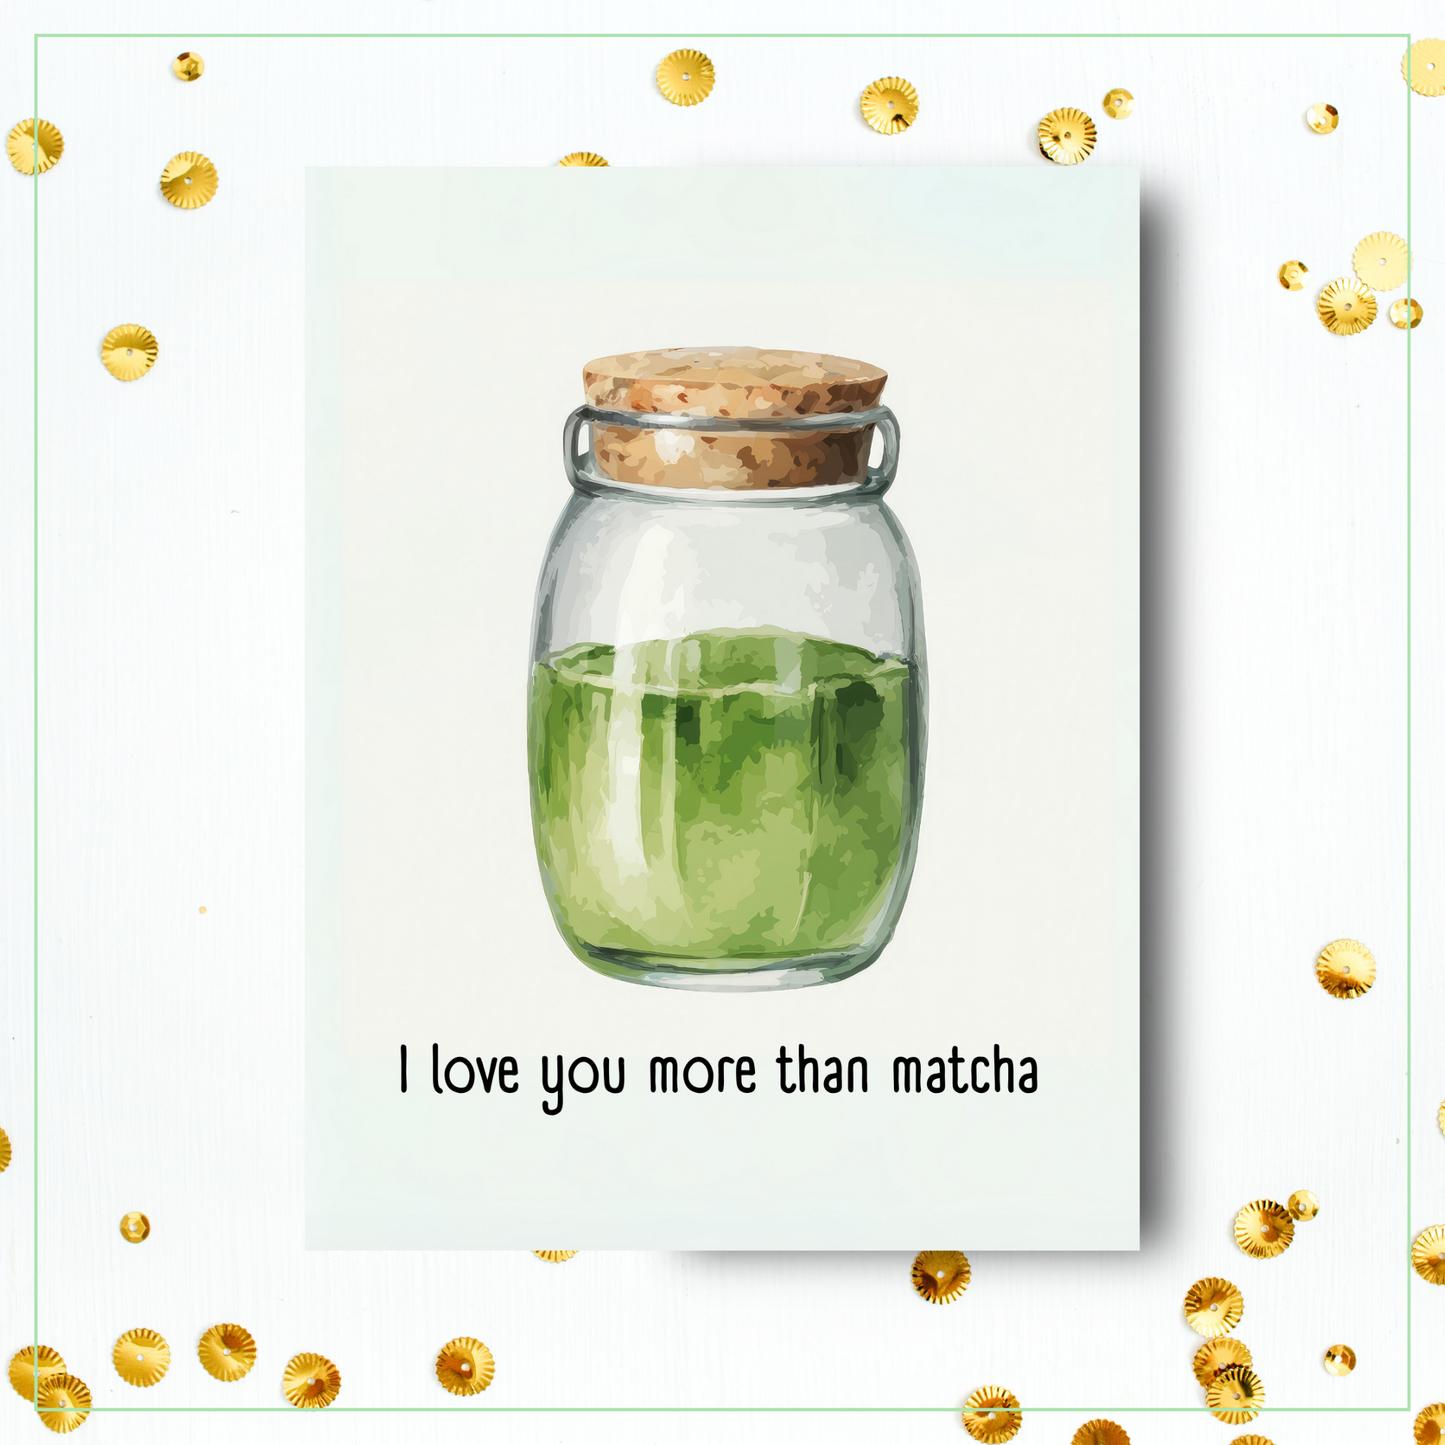 Greens Galore: Set of 5 Greeting Cards for Eco-Loving Hearts